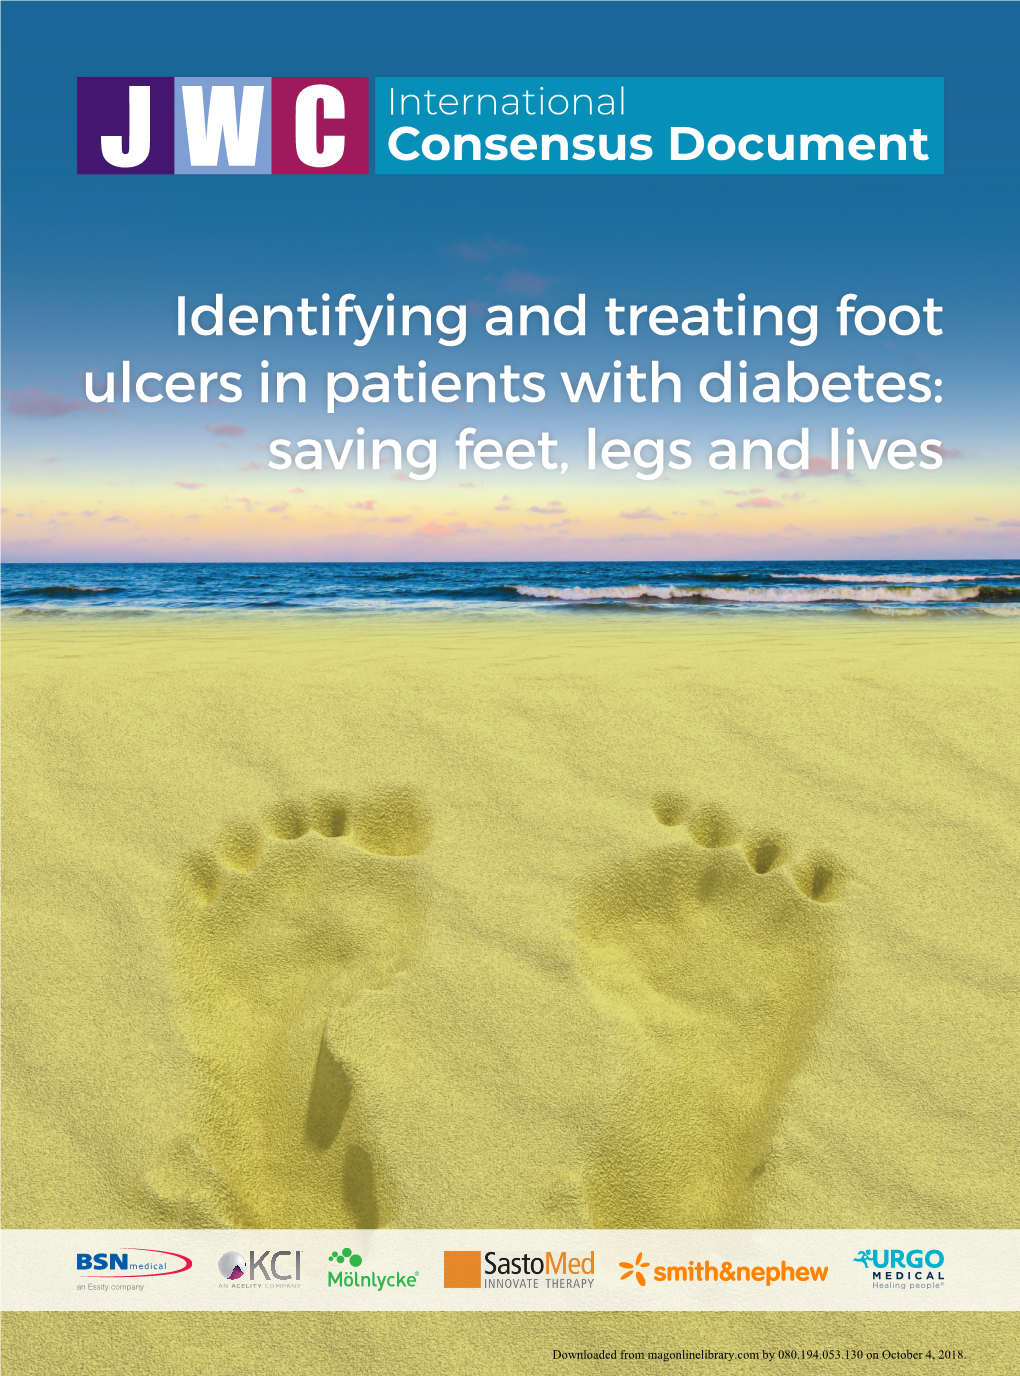 Identifying and Treating Foot Ulcers in Patients with Diabetes: Saving Feet, Legs and Lives